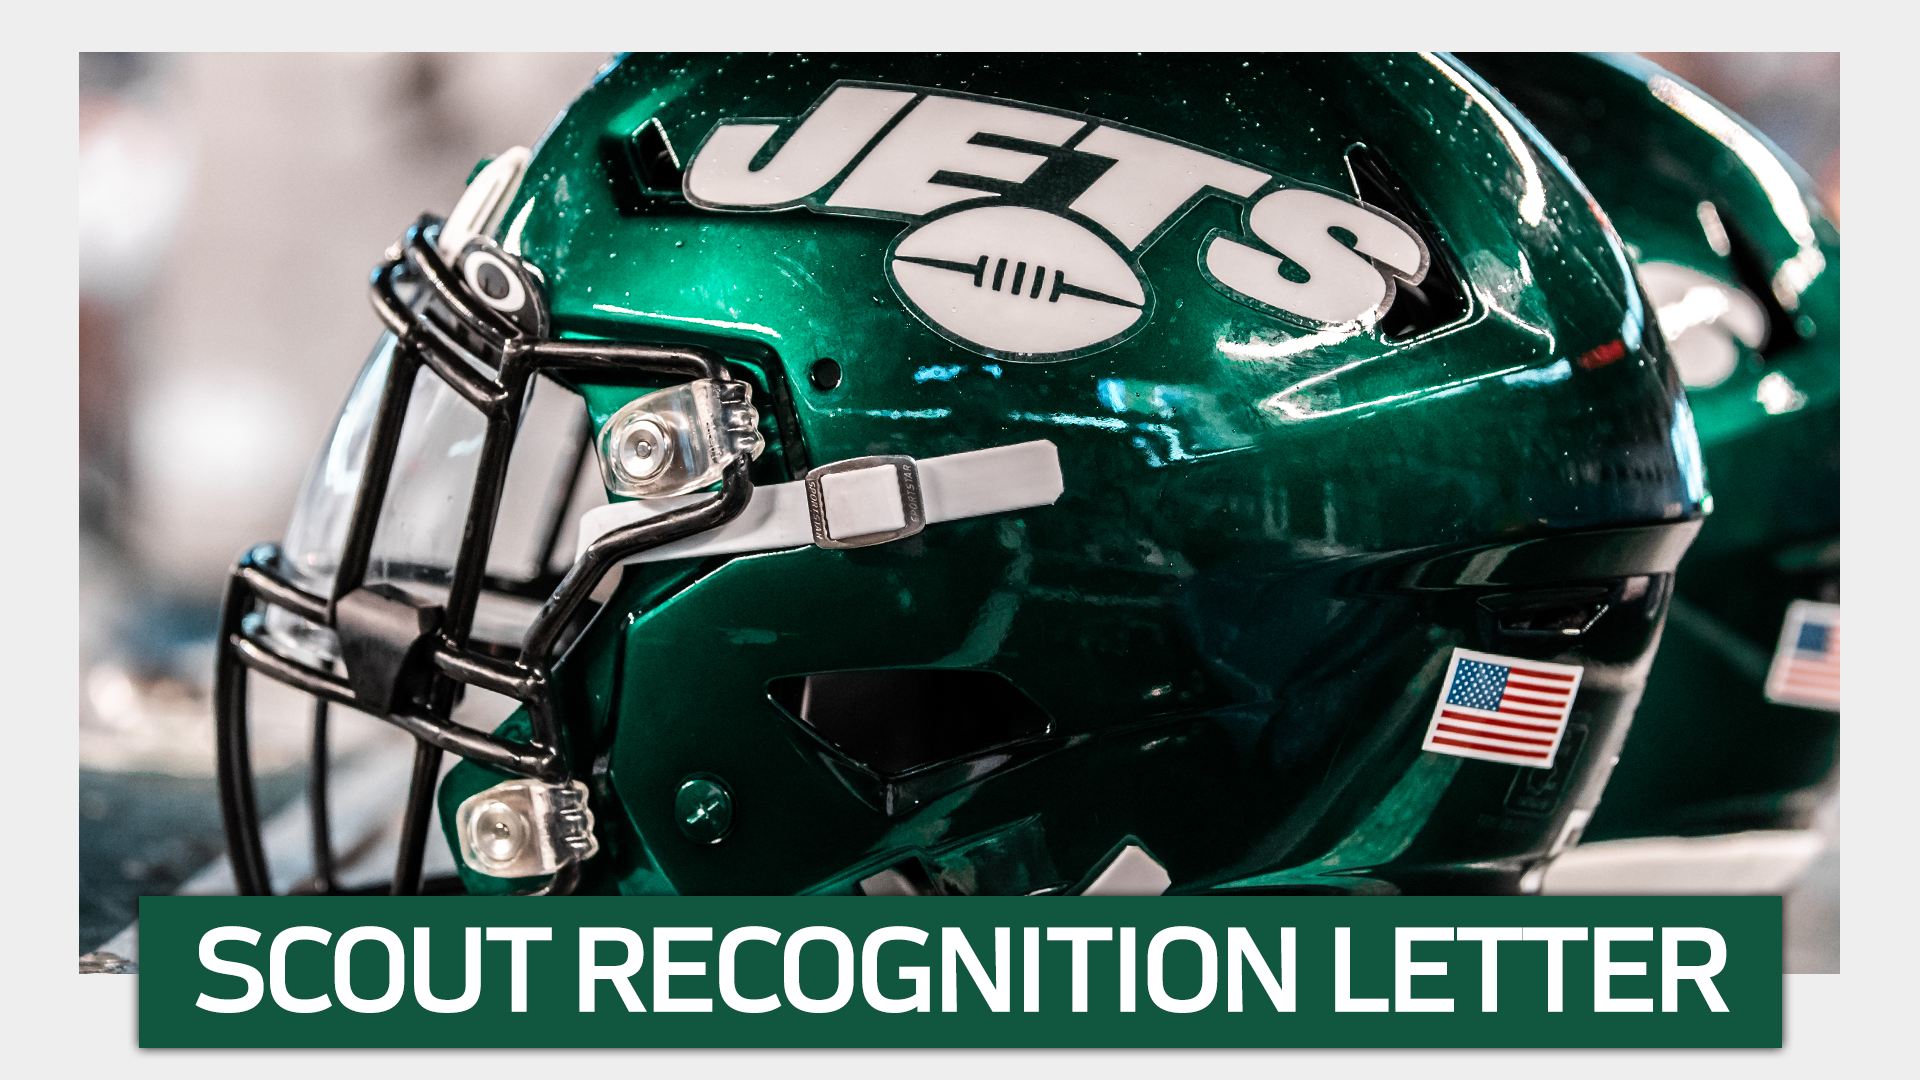 new york jets contact